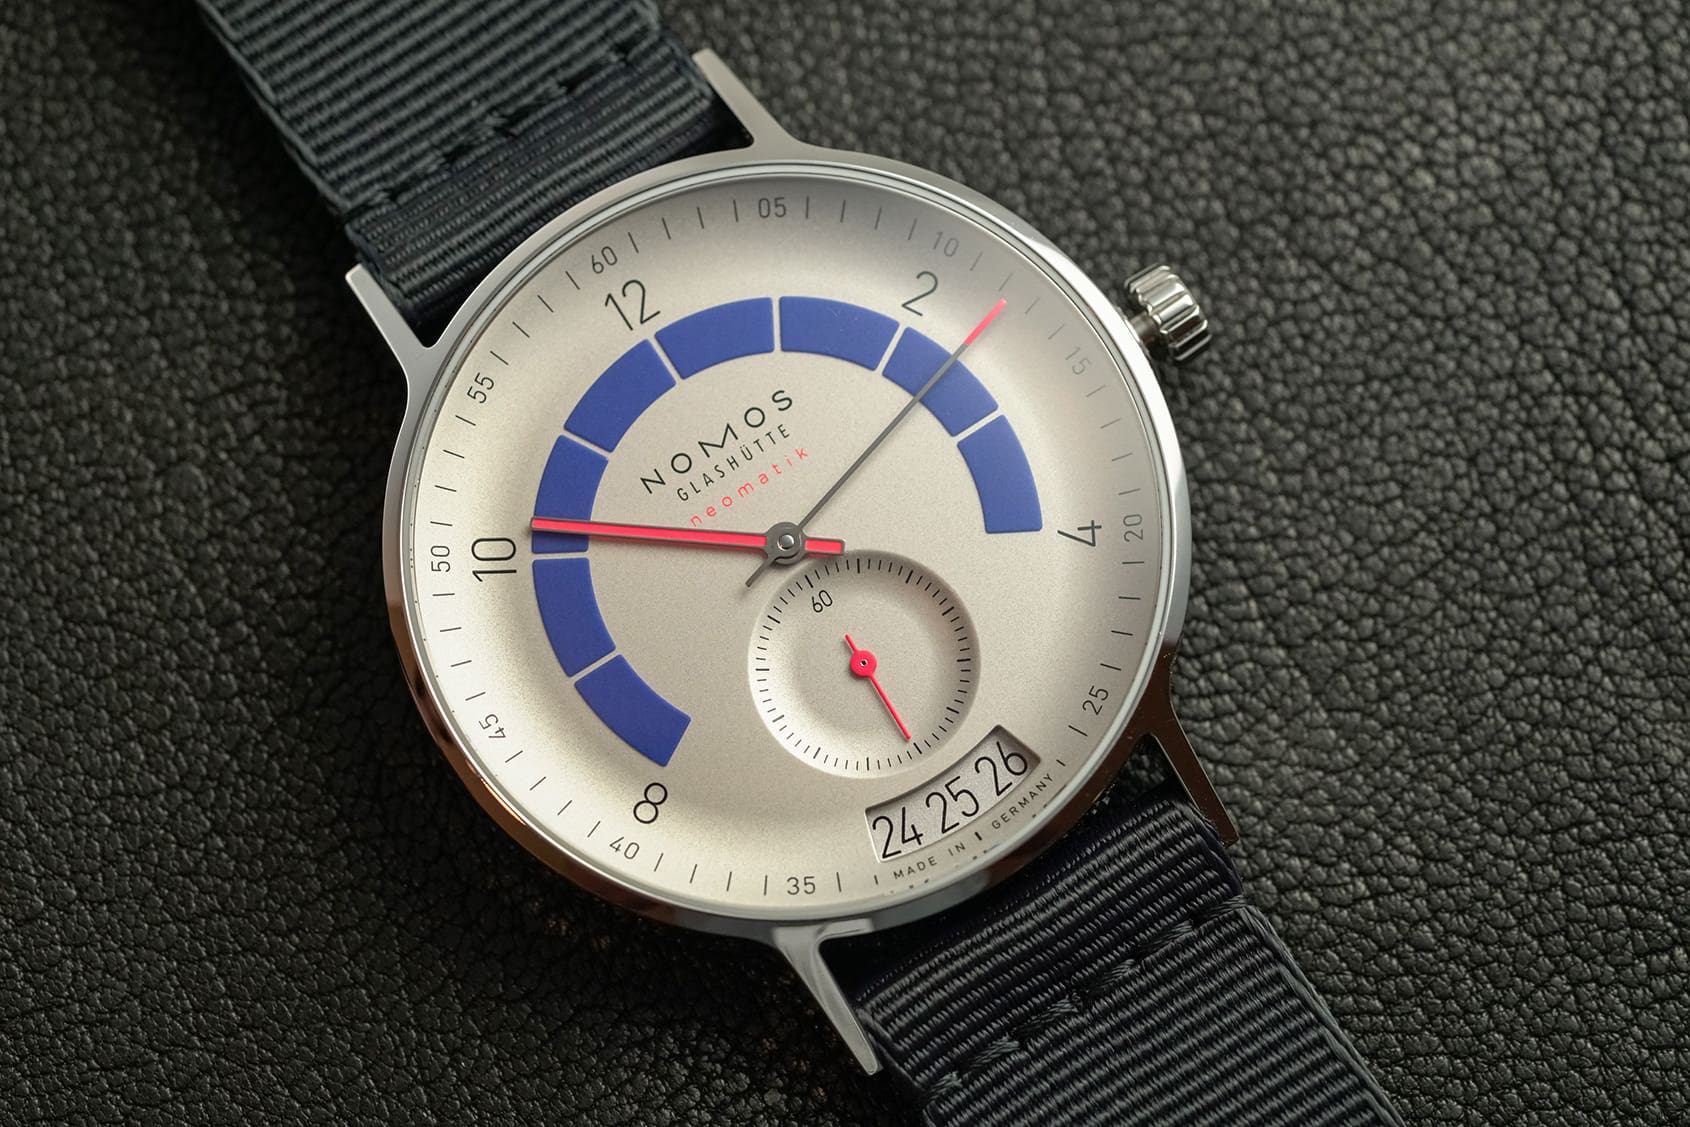 HANDS-ON: The Nomos Autobahn – a surprising tribute to the famously fast highway